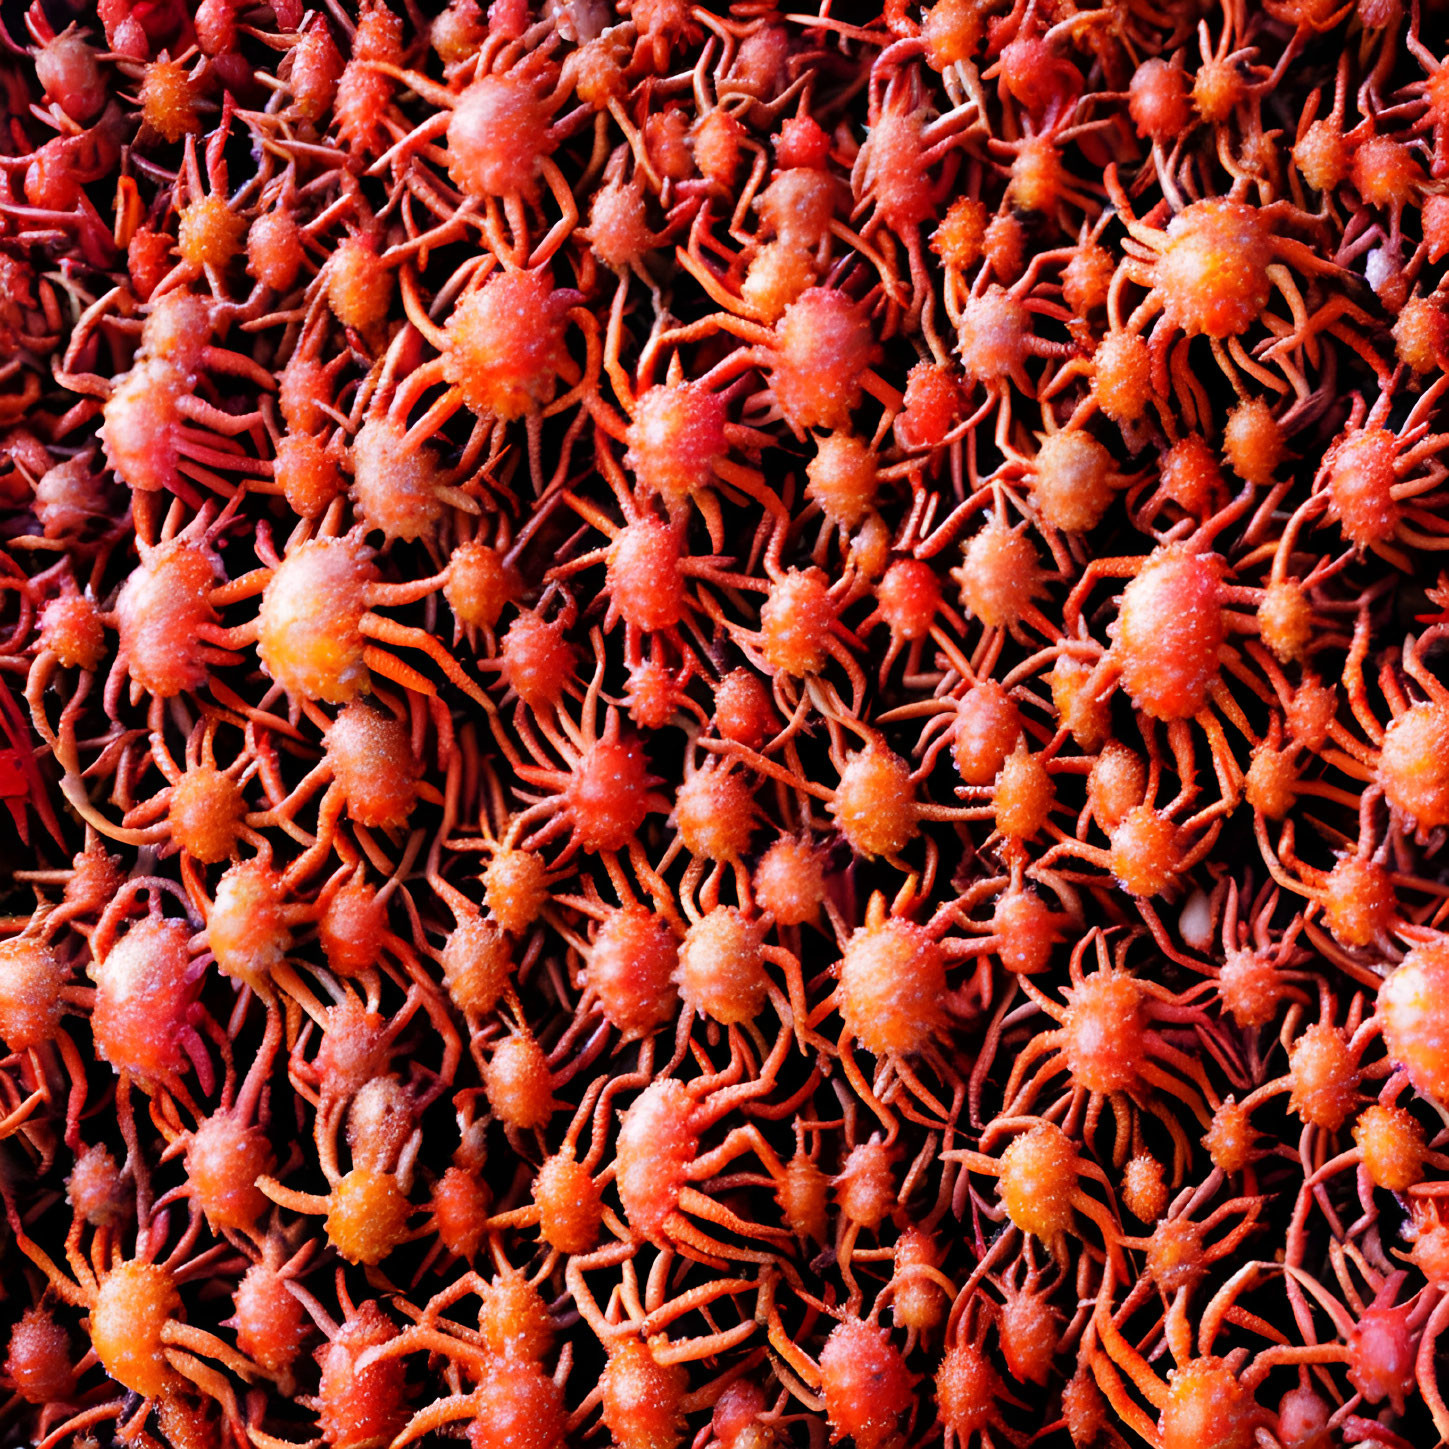 Cluster of Spiny Red Sea Urchins with Sharp Spines